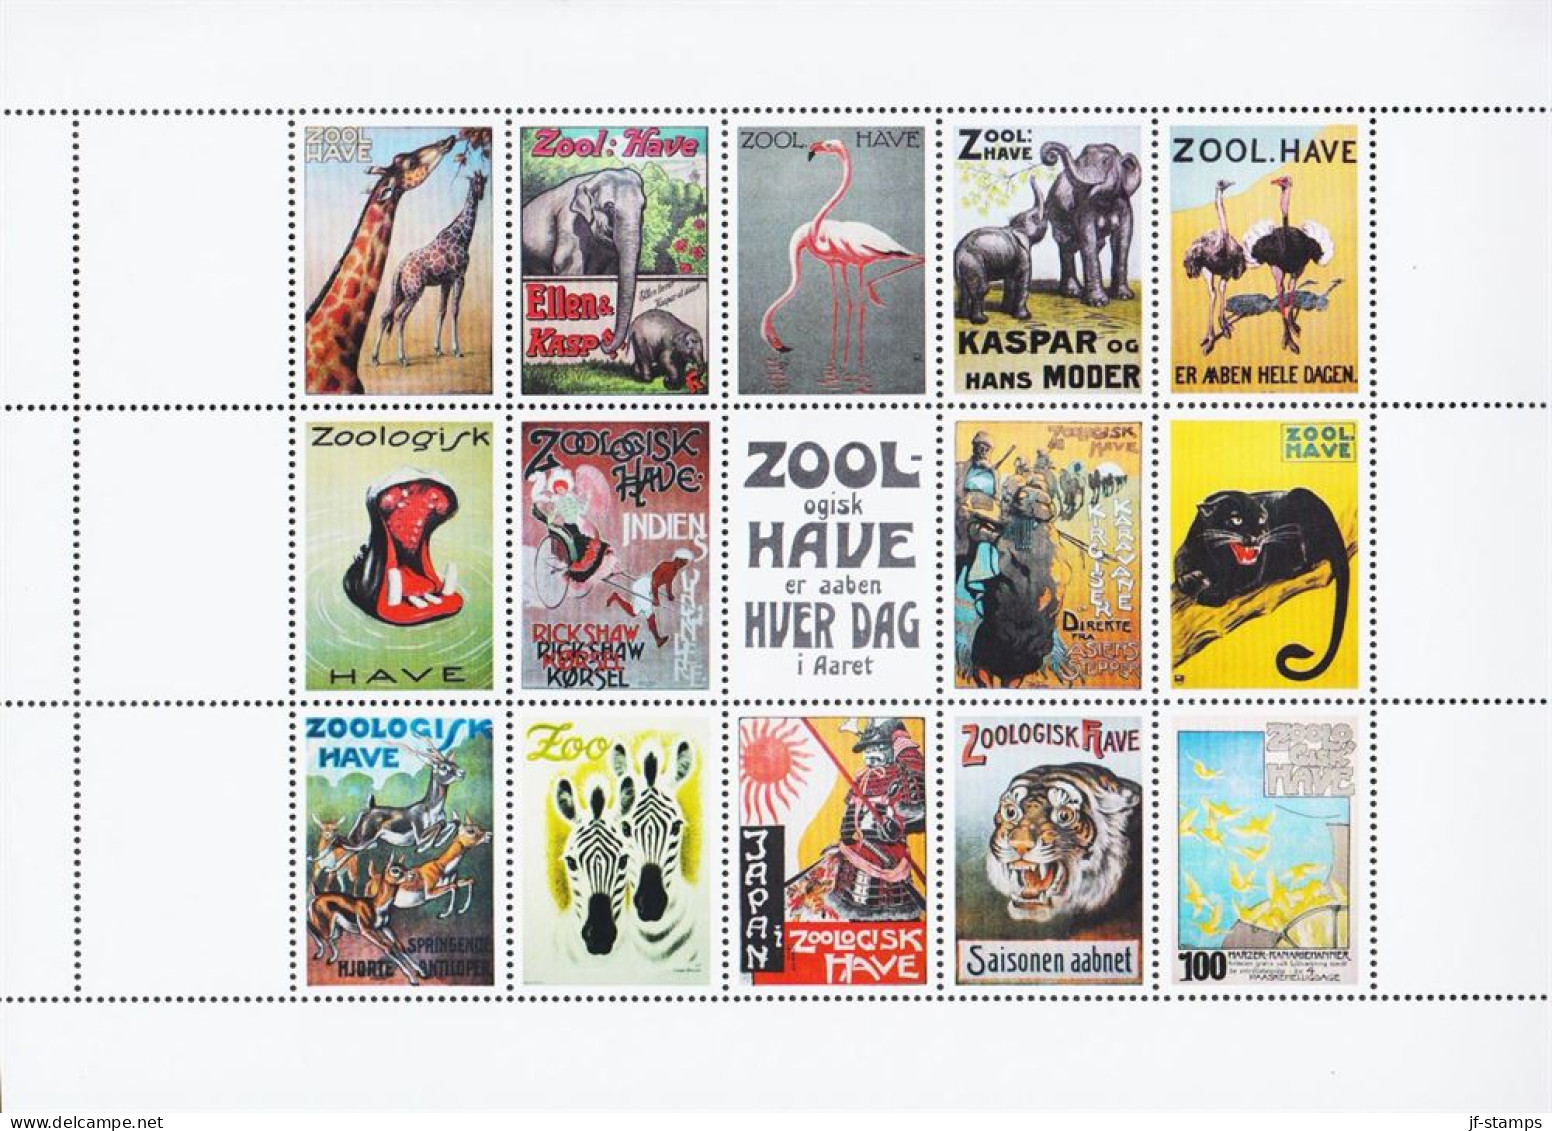 2009. DANMARK. ZOOLOGISK HAVE Sheet With A Selection Of 15 Posters In Stamp Size Never Hinged. Beautiful M... - JF544442 - Nuevos